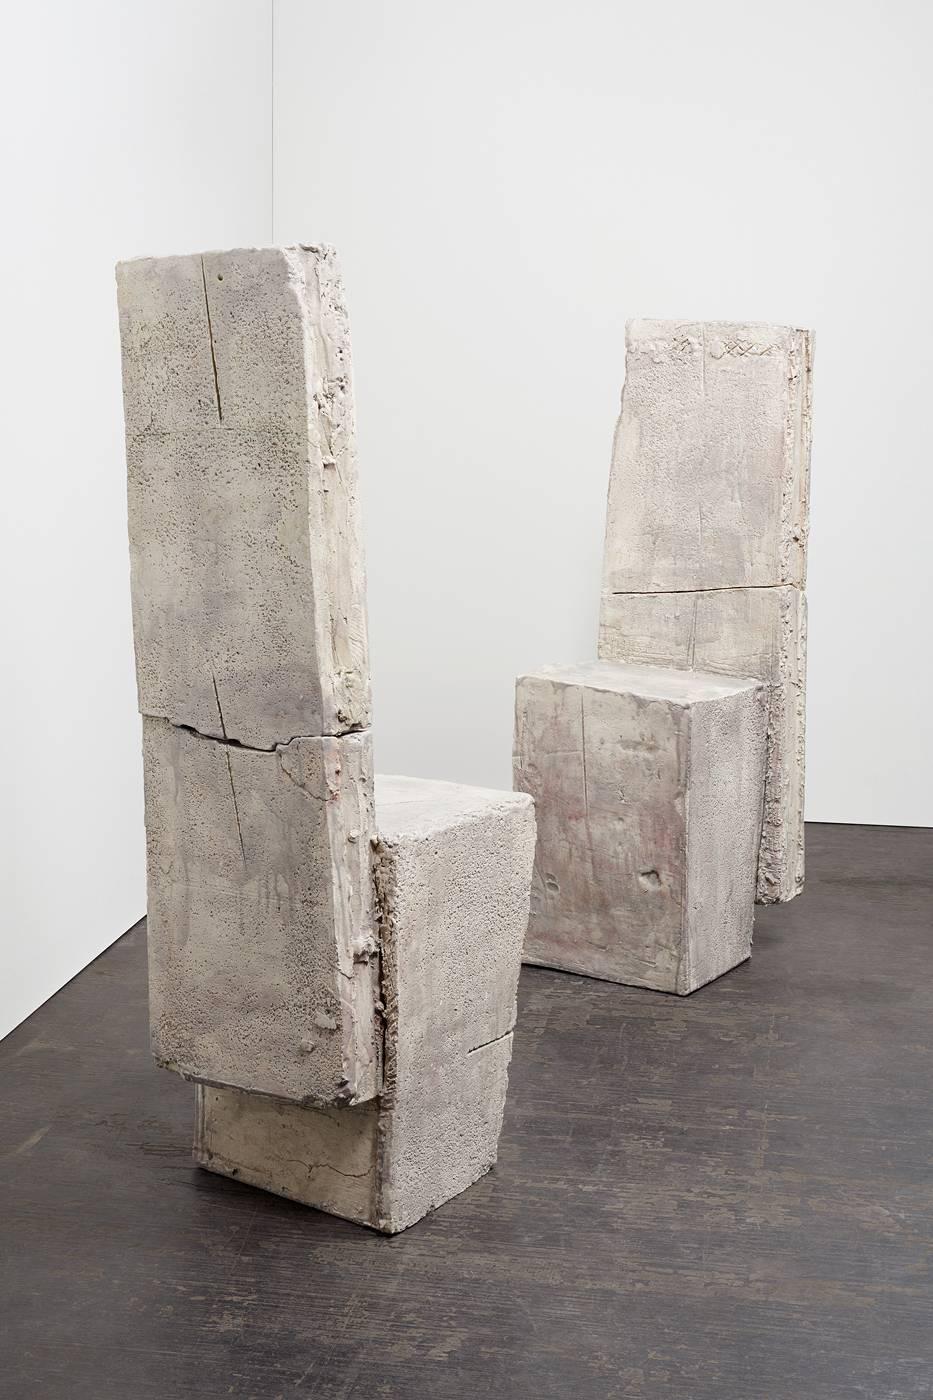 Chairs Facing Each Other - Sculpture by Dennis Gallagher